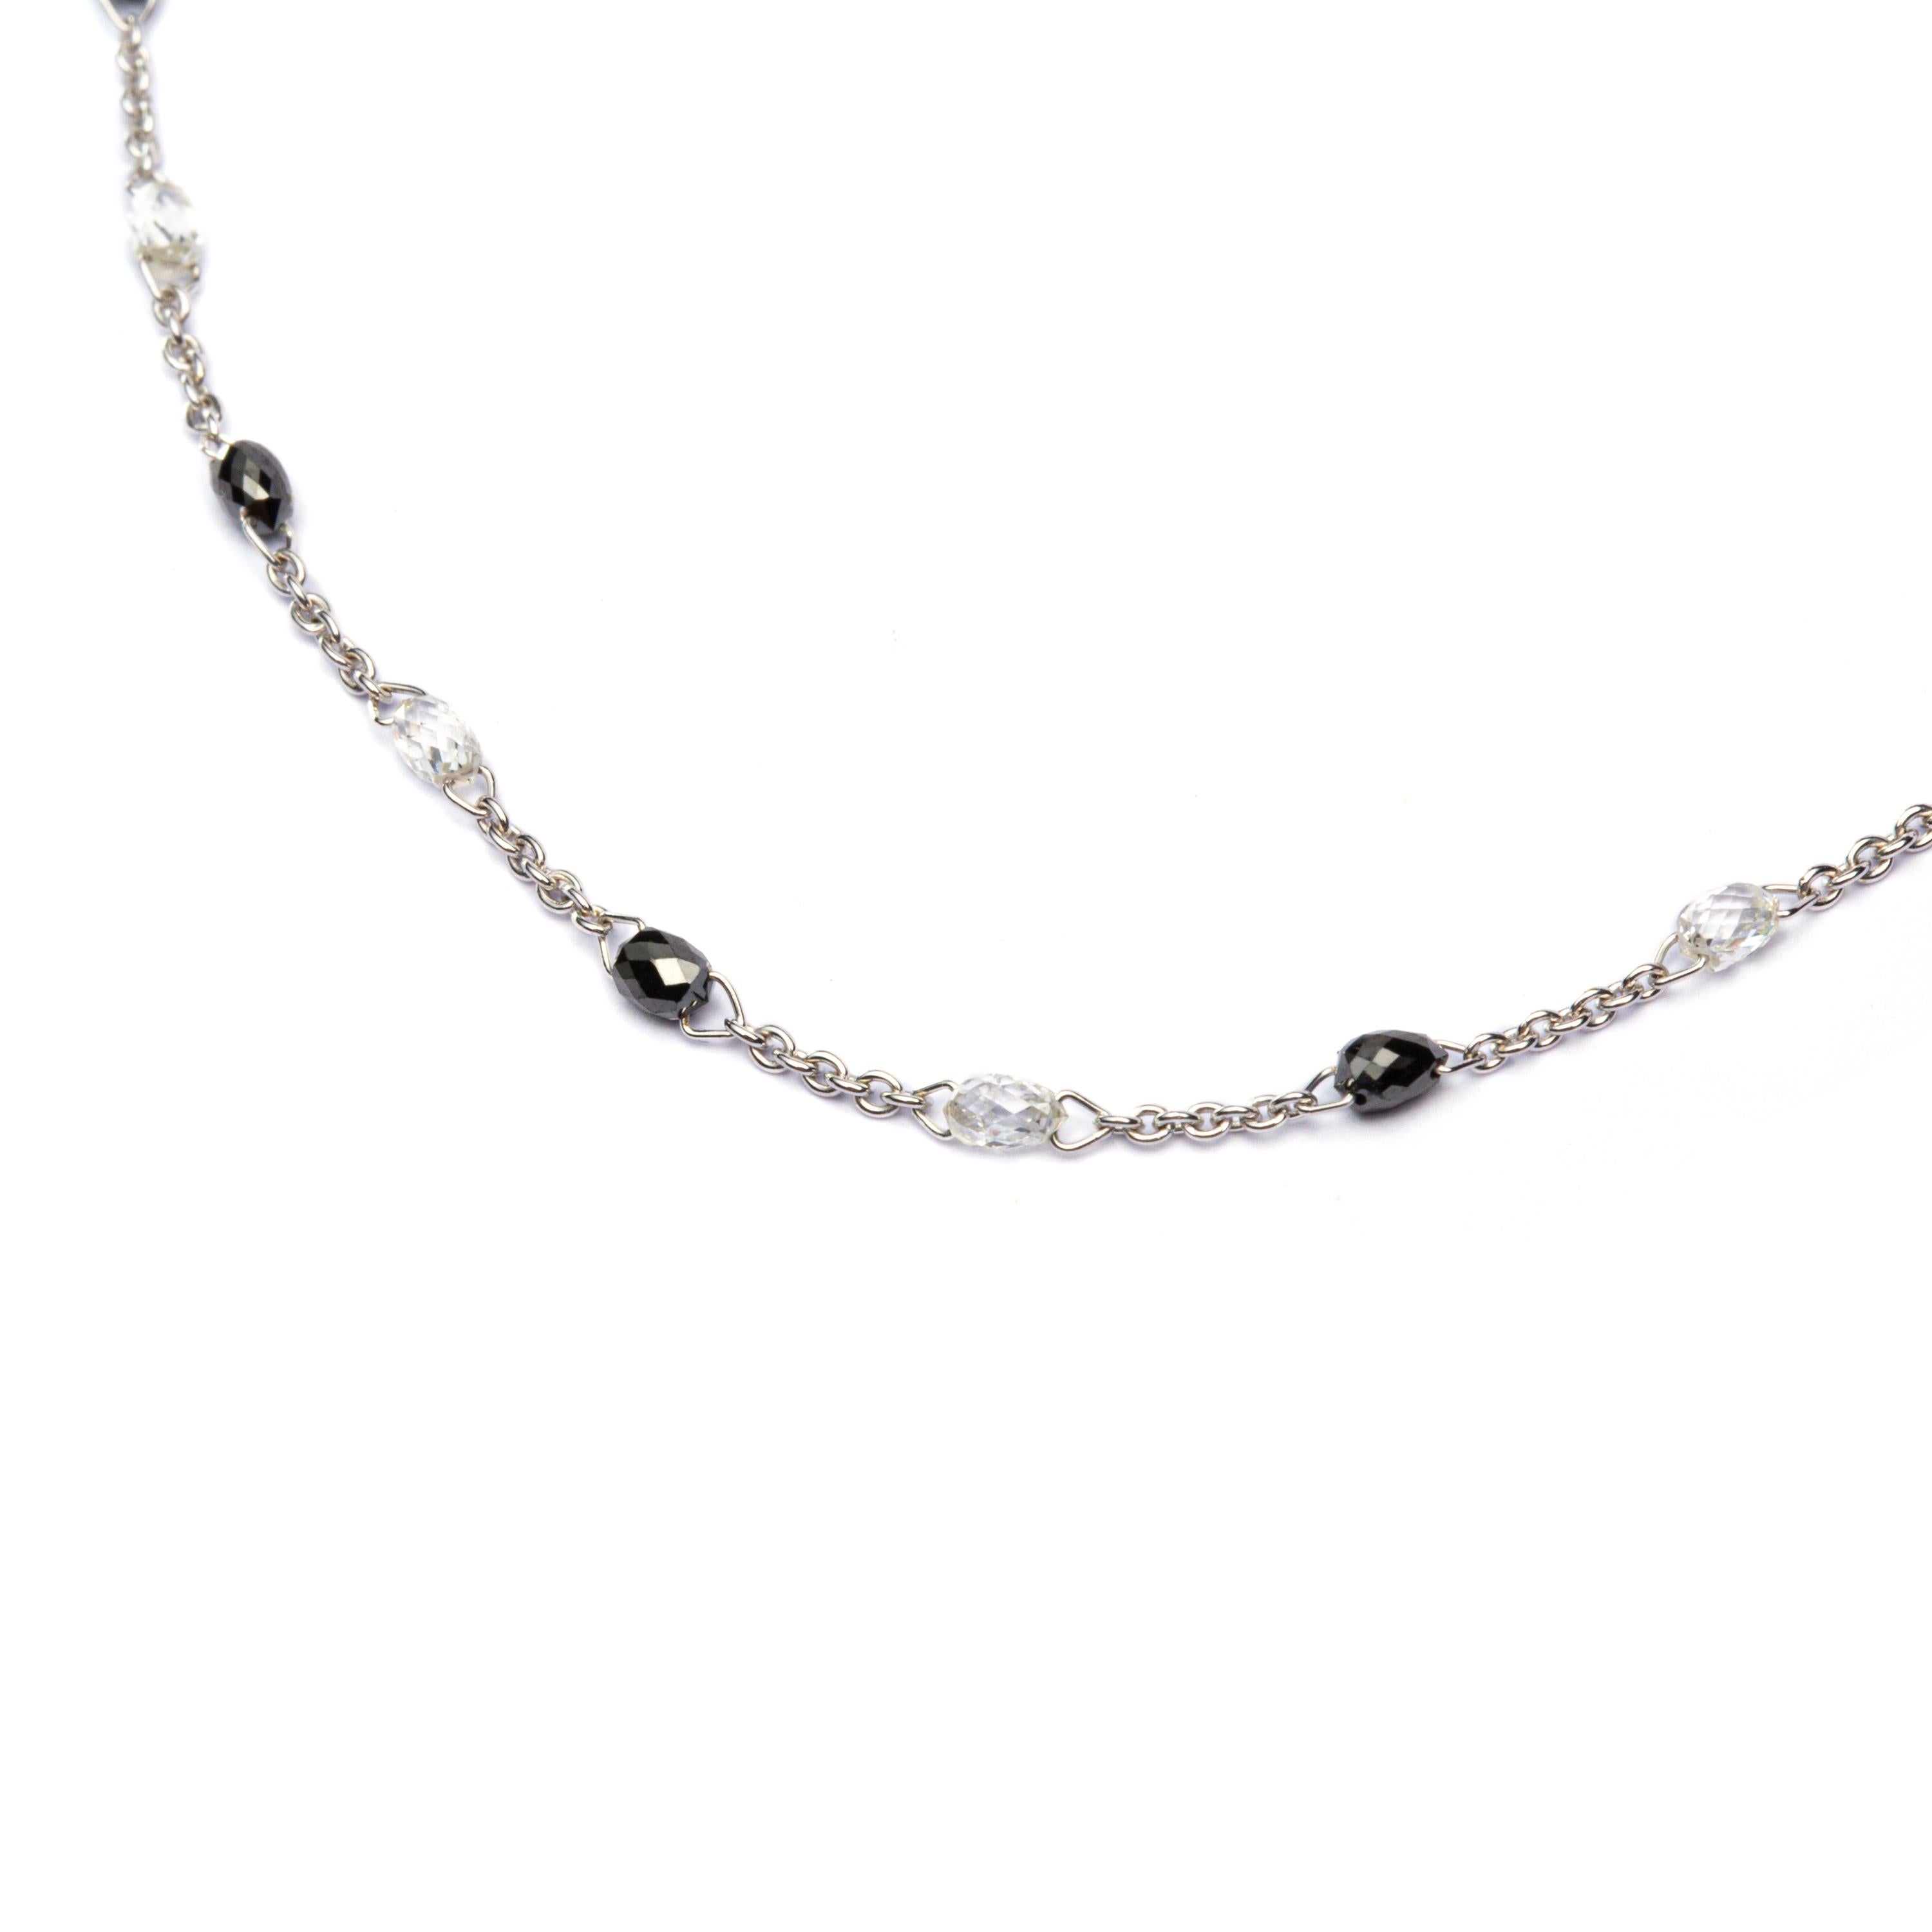 Alex Jona design collection, hand crafted in Italy, 18 karat white gold necklace alternating 12 white diamonds briolette cut weighing 1.16 carats, G color, VS2 clarity and 13 black diamonds briolette cut weighing 1.35 carats, G color, VS2 clarity. 